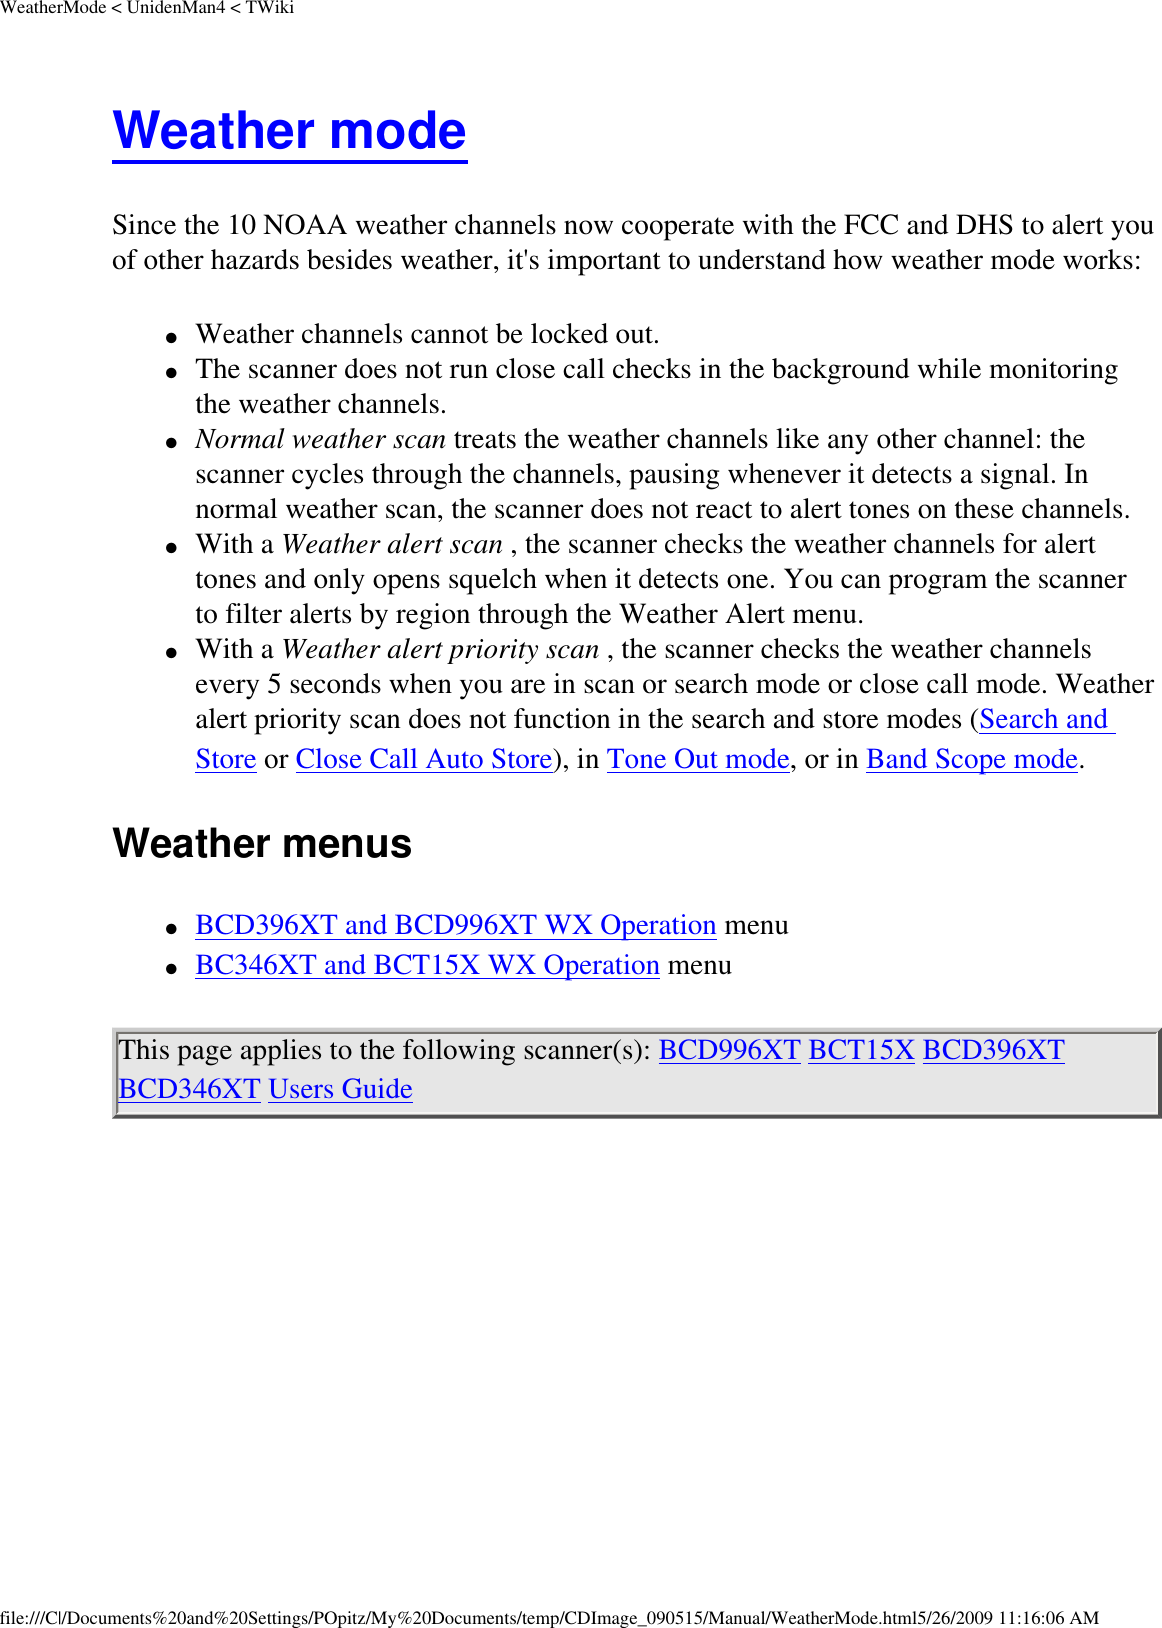 WeatherMode &lt; UnidenMan4 &lt; TWikiWeather mode Since the 10 NOAA weather channels now cooperate with the FCC and DHS to alert you of other hazards besides weather, it&apos;s important to understand how weather mode works: ●     Weather channels cannot be locked out. ●     The scanner does not run close call checks in the background while monitoring the weather channels. ●     Normal weather scan treats the weather channels like any other channel: the scanner cycles through the channels, pausing whenever it detects a signal. In normal weather scan, the scanner does not react to alert tones on these channels. ●     With a Weather alert scan , the scanner checks the weather channels for alert tones and only opens squelch when it detects one. You can program the scanner to filter alerts by region through the Weather Alert menu. ●     With a Weather alert priority scan , the scanner checks the weather channels every 5 seconds when you are in scan or search mode or close call mode. Weather alert priority scan does not function in the search and store modes (Search and Store or Close Call Auto Store), in Tone Out mode, or in Band Scope mode. Weather menus ●     BCD396XT and BCD996XT WX Operation menu ●     BC346XT and BCT15X WX Operation menu This page applies to the following scanner(s): BCD996XT BCT15X BCD396XT BCD346XT Users Guide file:///C|/Documents%20and%20Settings/POpitz/My%20Documents/temp/CDImage_090515/Manual/WeatherMode.html5/26/2009 11:16:06 AM